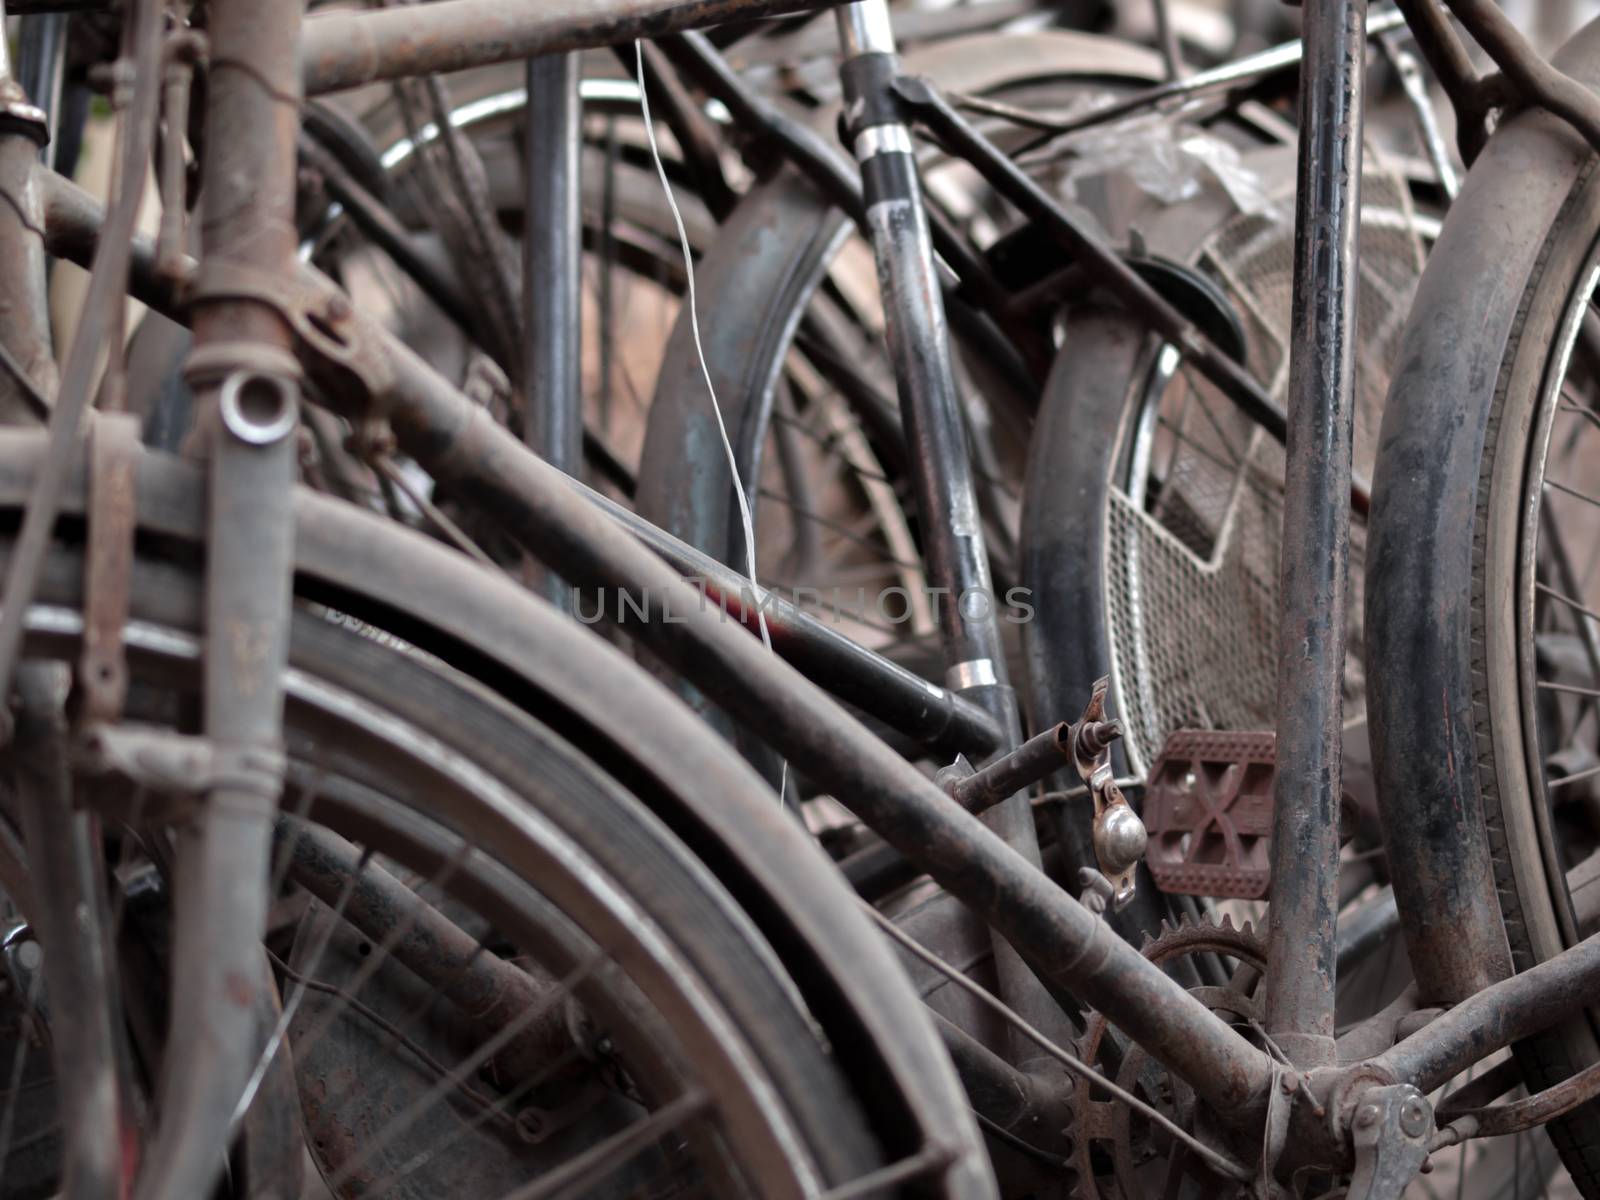 COLOR PHOTO OF ABSTRACT SHOT OF OLD RUSTY BICYCLE PARTS